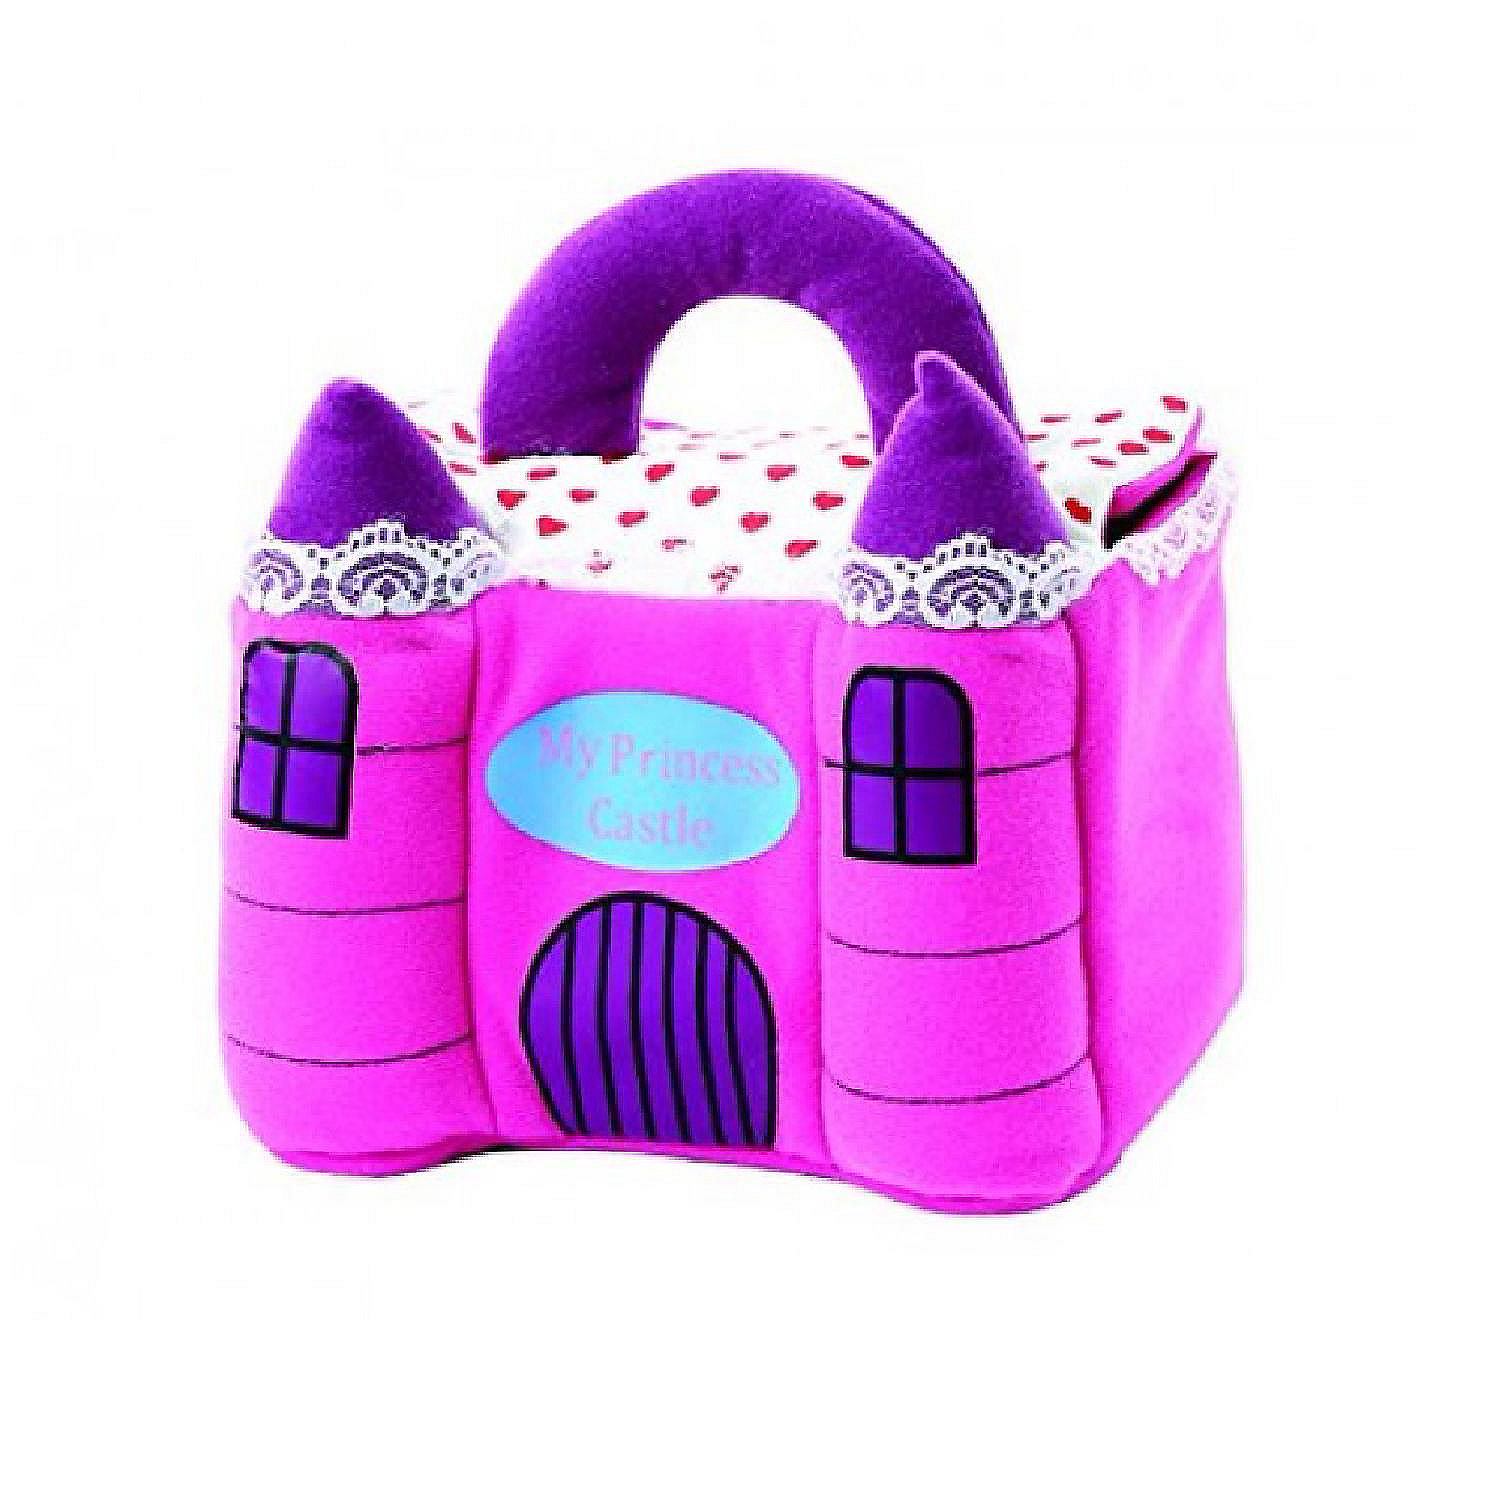 kovot-my-first-princess-castle-plush-sound-toys-and-carrier_14331646-a01$NOWA$